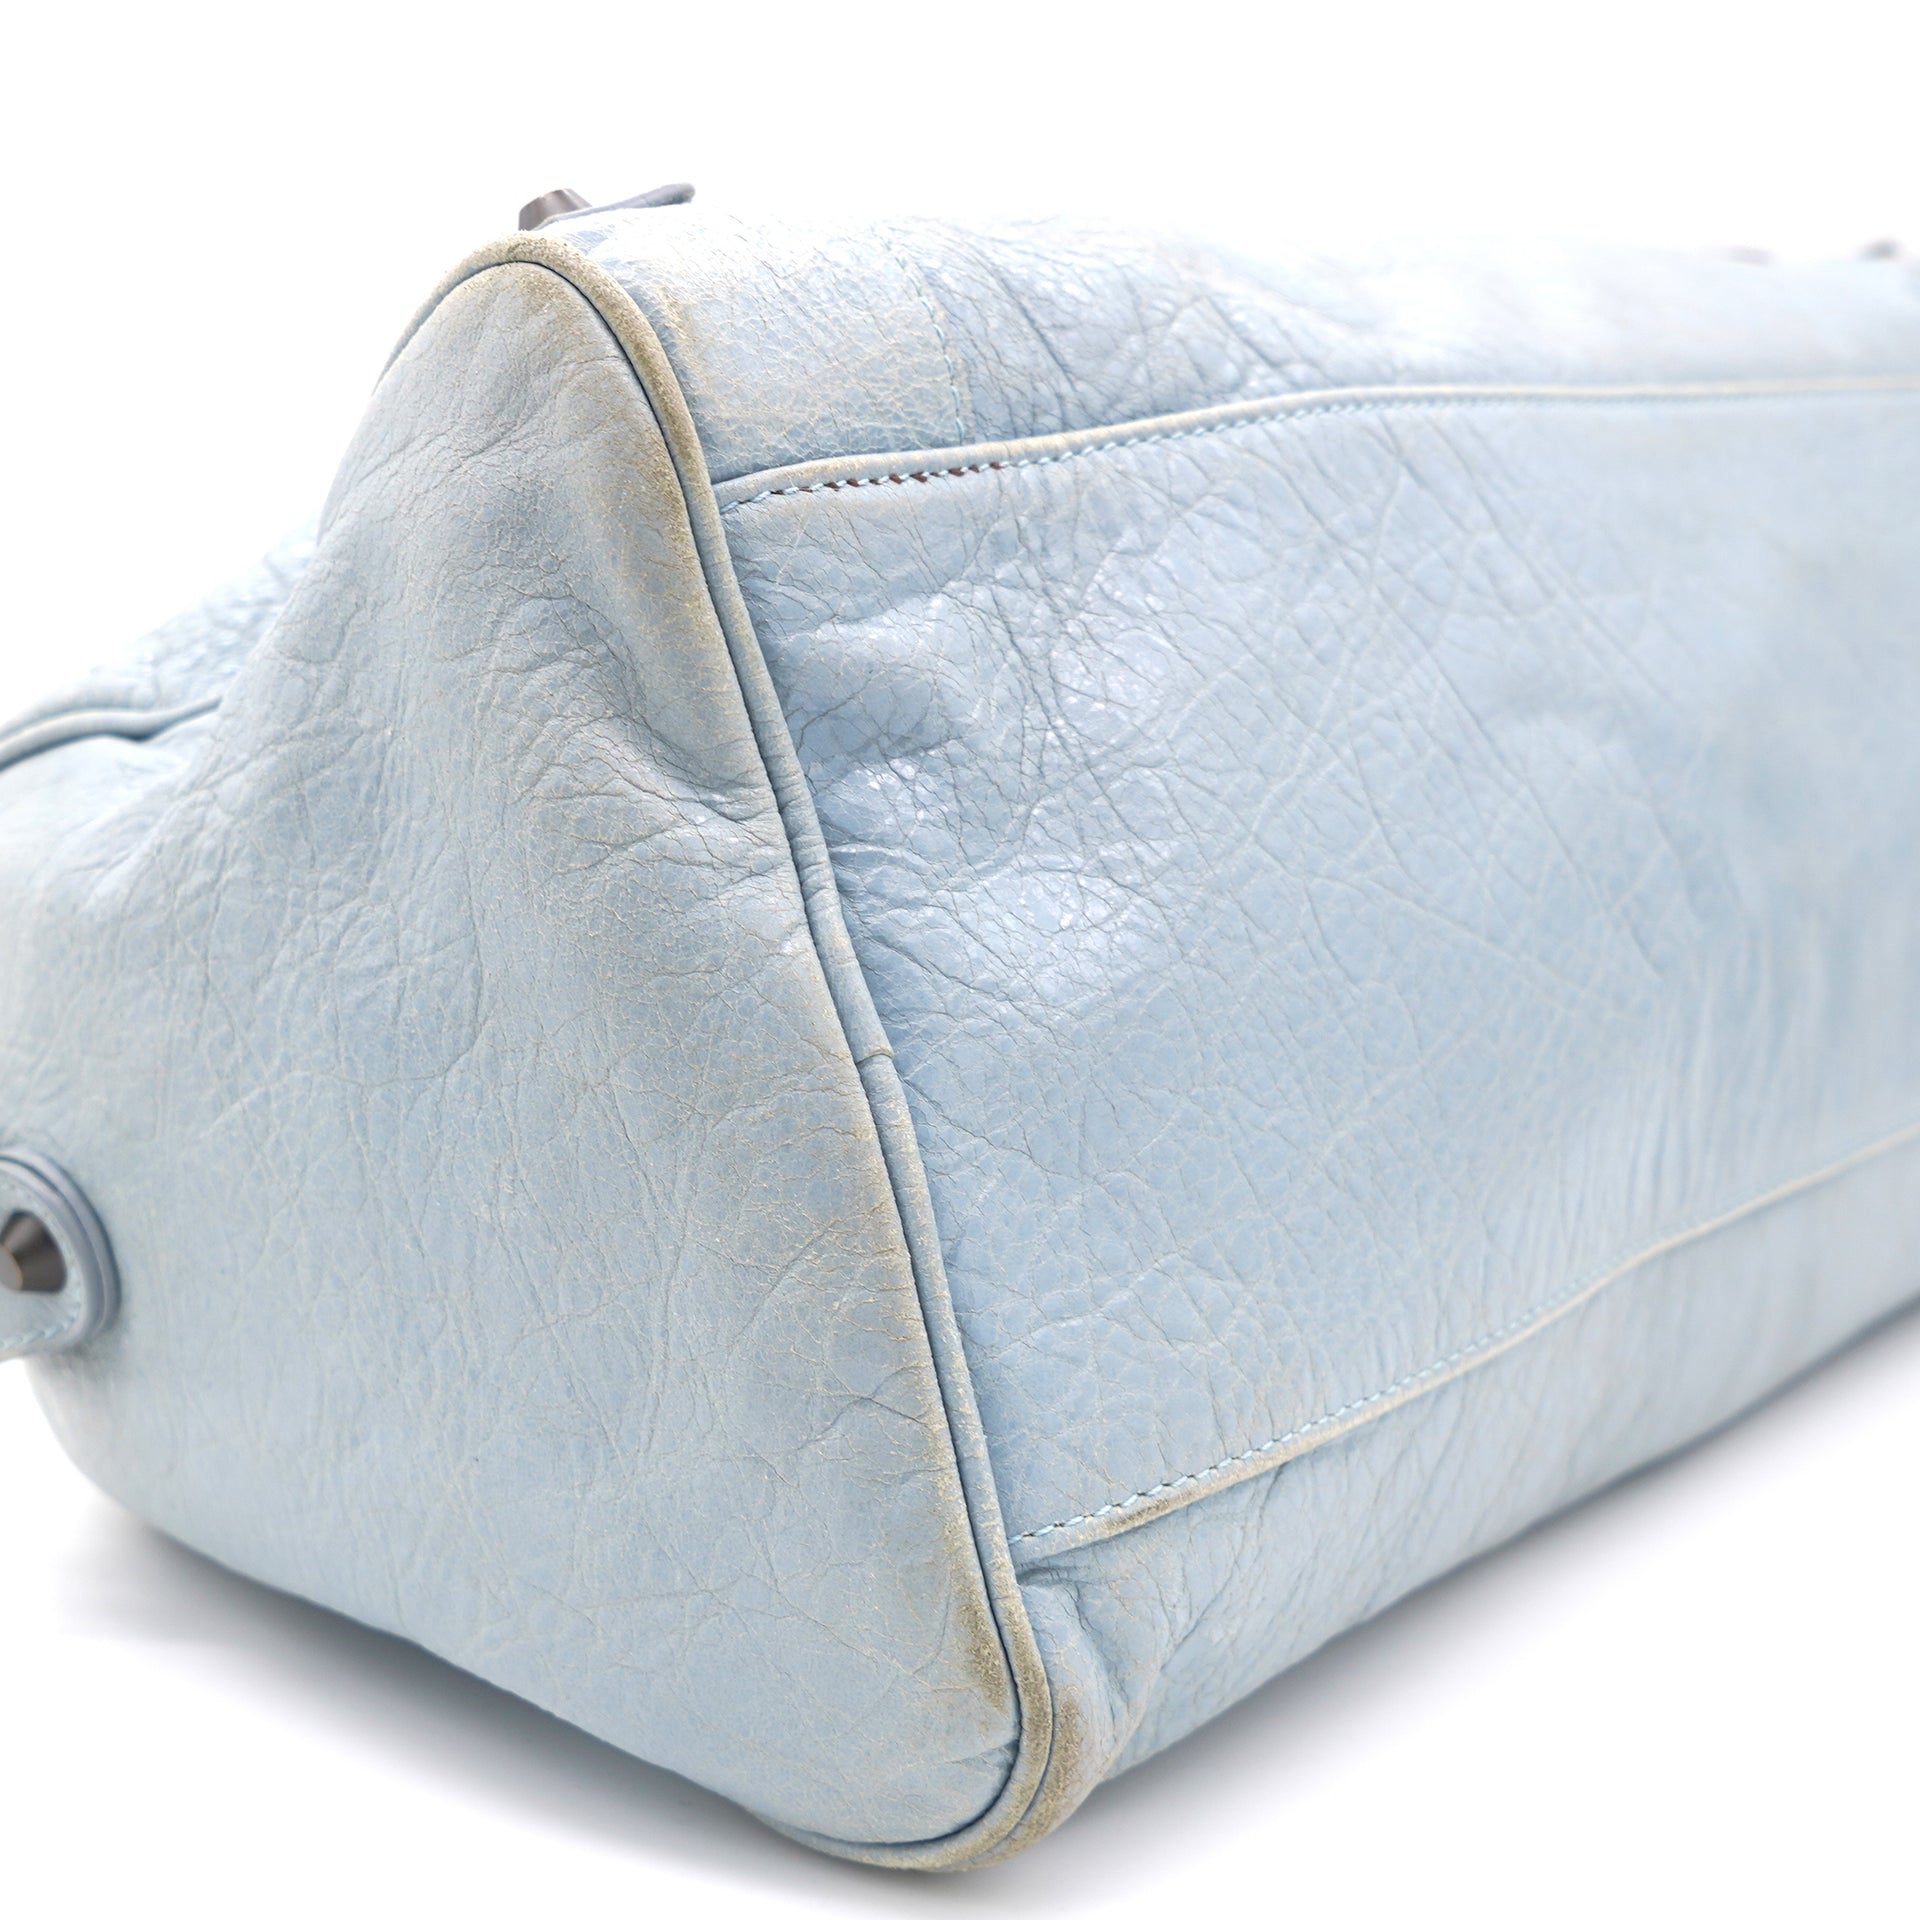 Light Blue Lambskin Leather Motorcycle City Bag